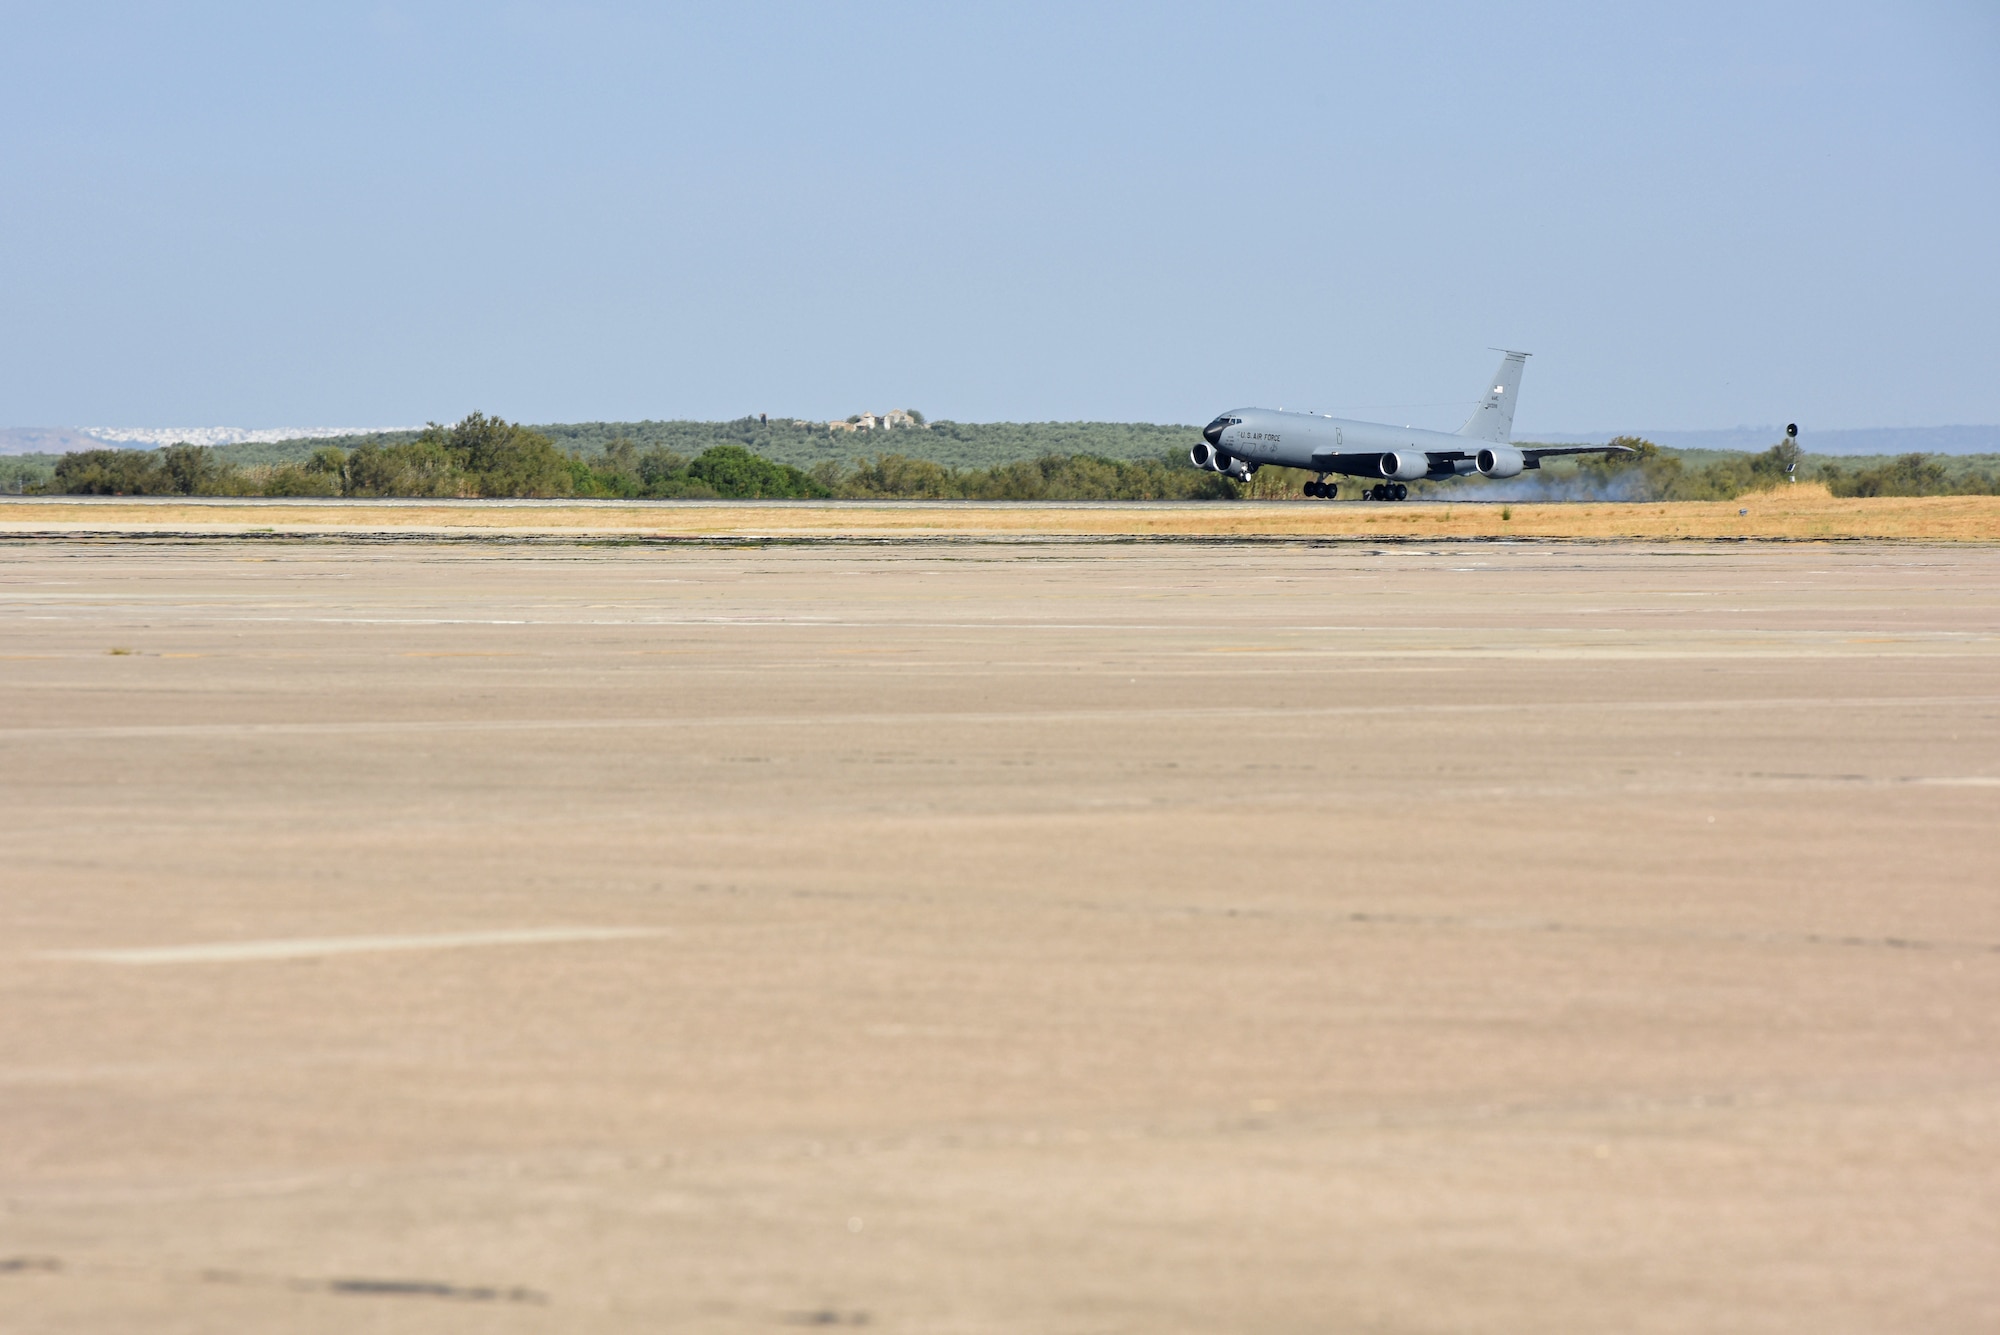 A Fairchild Air Force Base KC-135 Stratotanker touches down at Moron Air Base, Spain, Sept. 7, 2019. Team Fairchild deployed multiple air refueling assets to support Operation Juniper Micron, a French-led counterterrorism operation in Mali and North Africa. (U.S. Air Force photo by Staff Sgt. Nick J. Daniello)